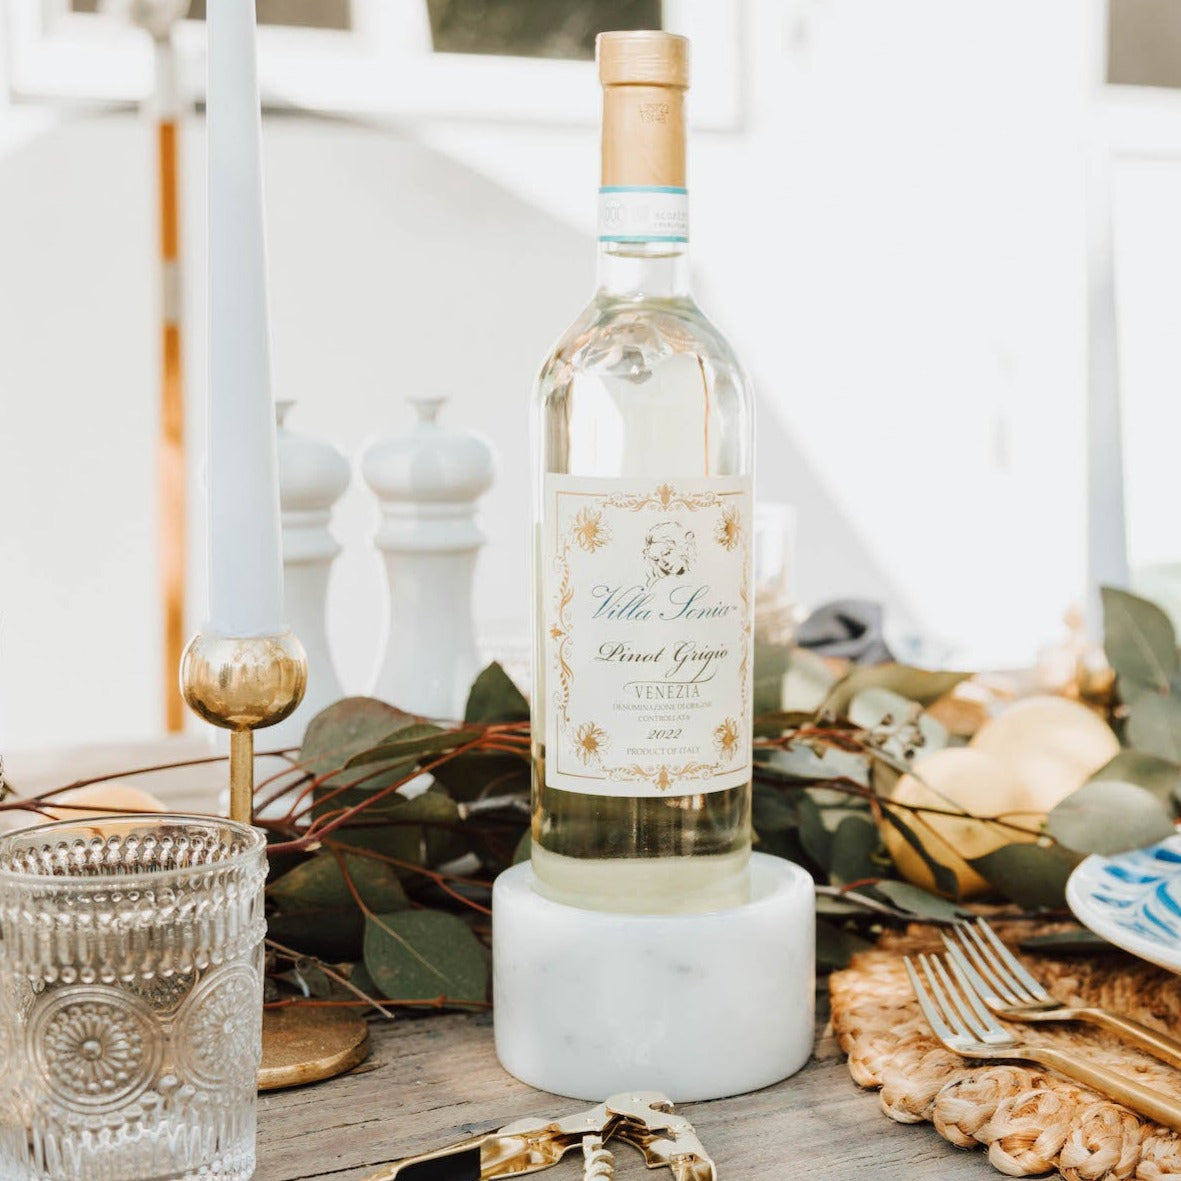 One white marble wine bottle coaster holding a bottle of Sauvignon Blanc on a wooden outdoor table.